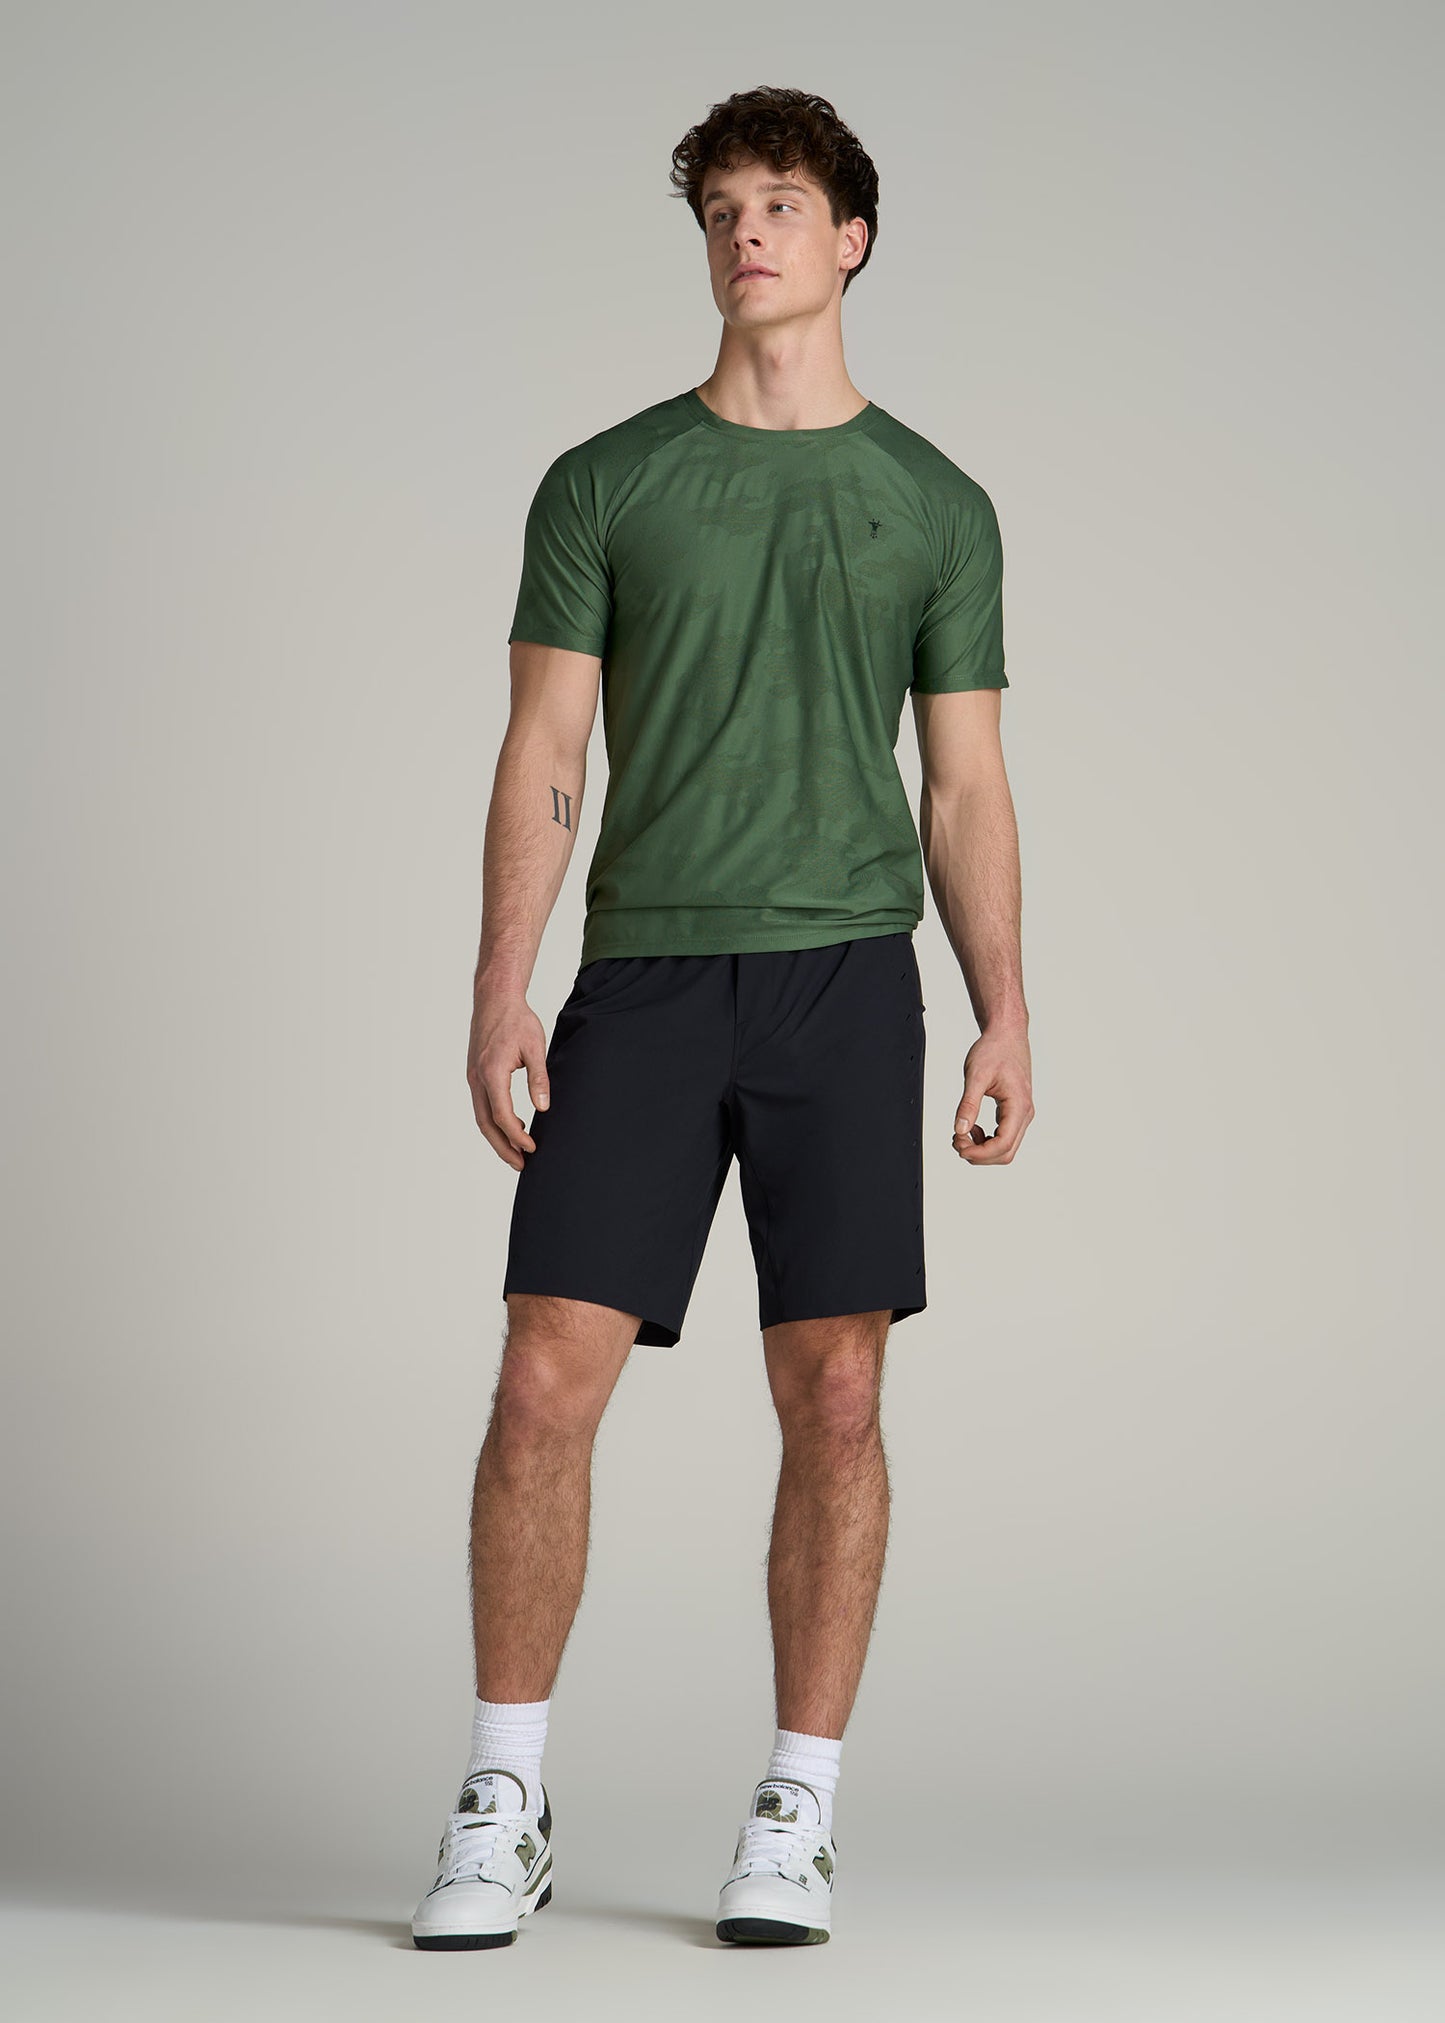 A tall man wearing American Tall's Featherweight Perforated Training Shorts in Black and Raglan Training T-Shirt in Forest Green.